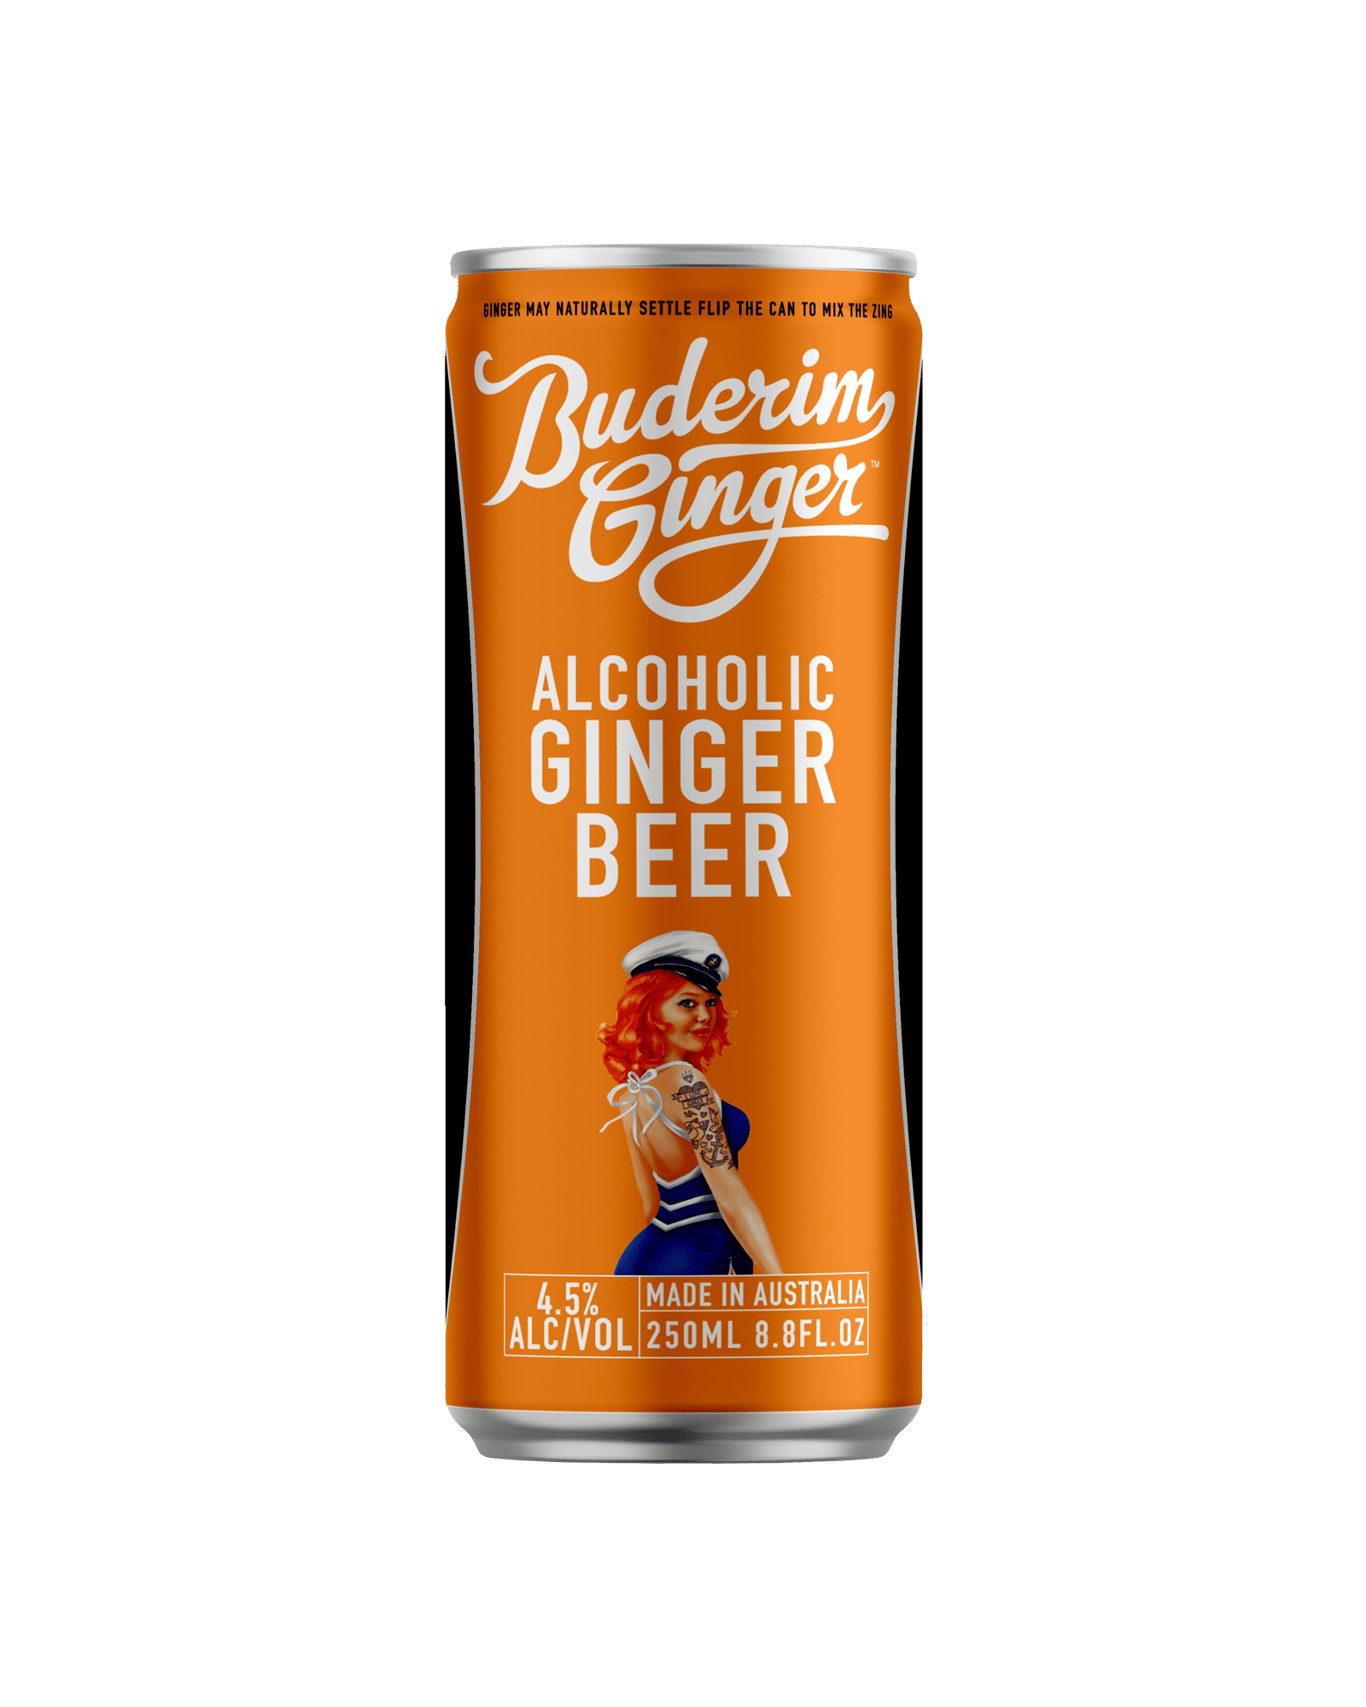 Buderim Ginger Alcoholic Ginger Beer 250ml Unbeatable Prices Buy Online Best Deals With